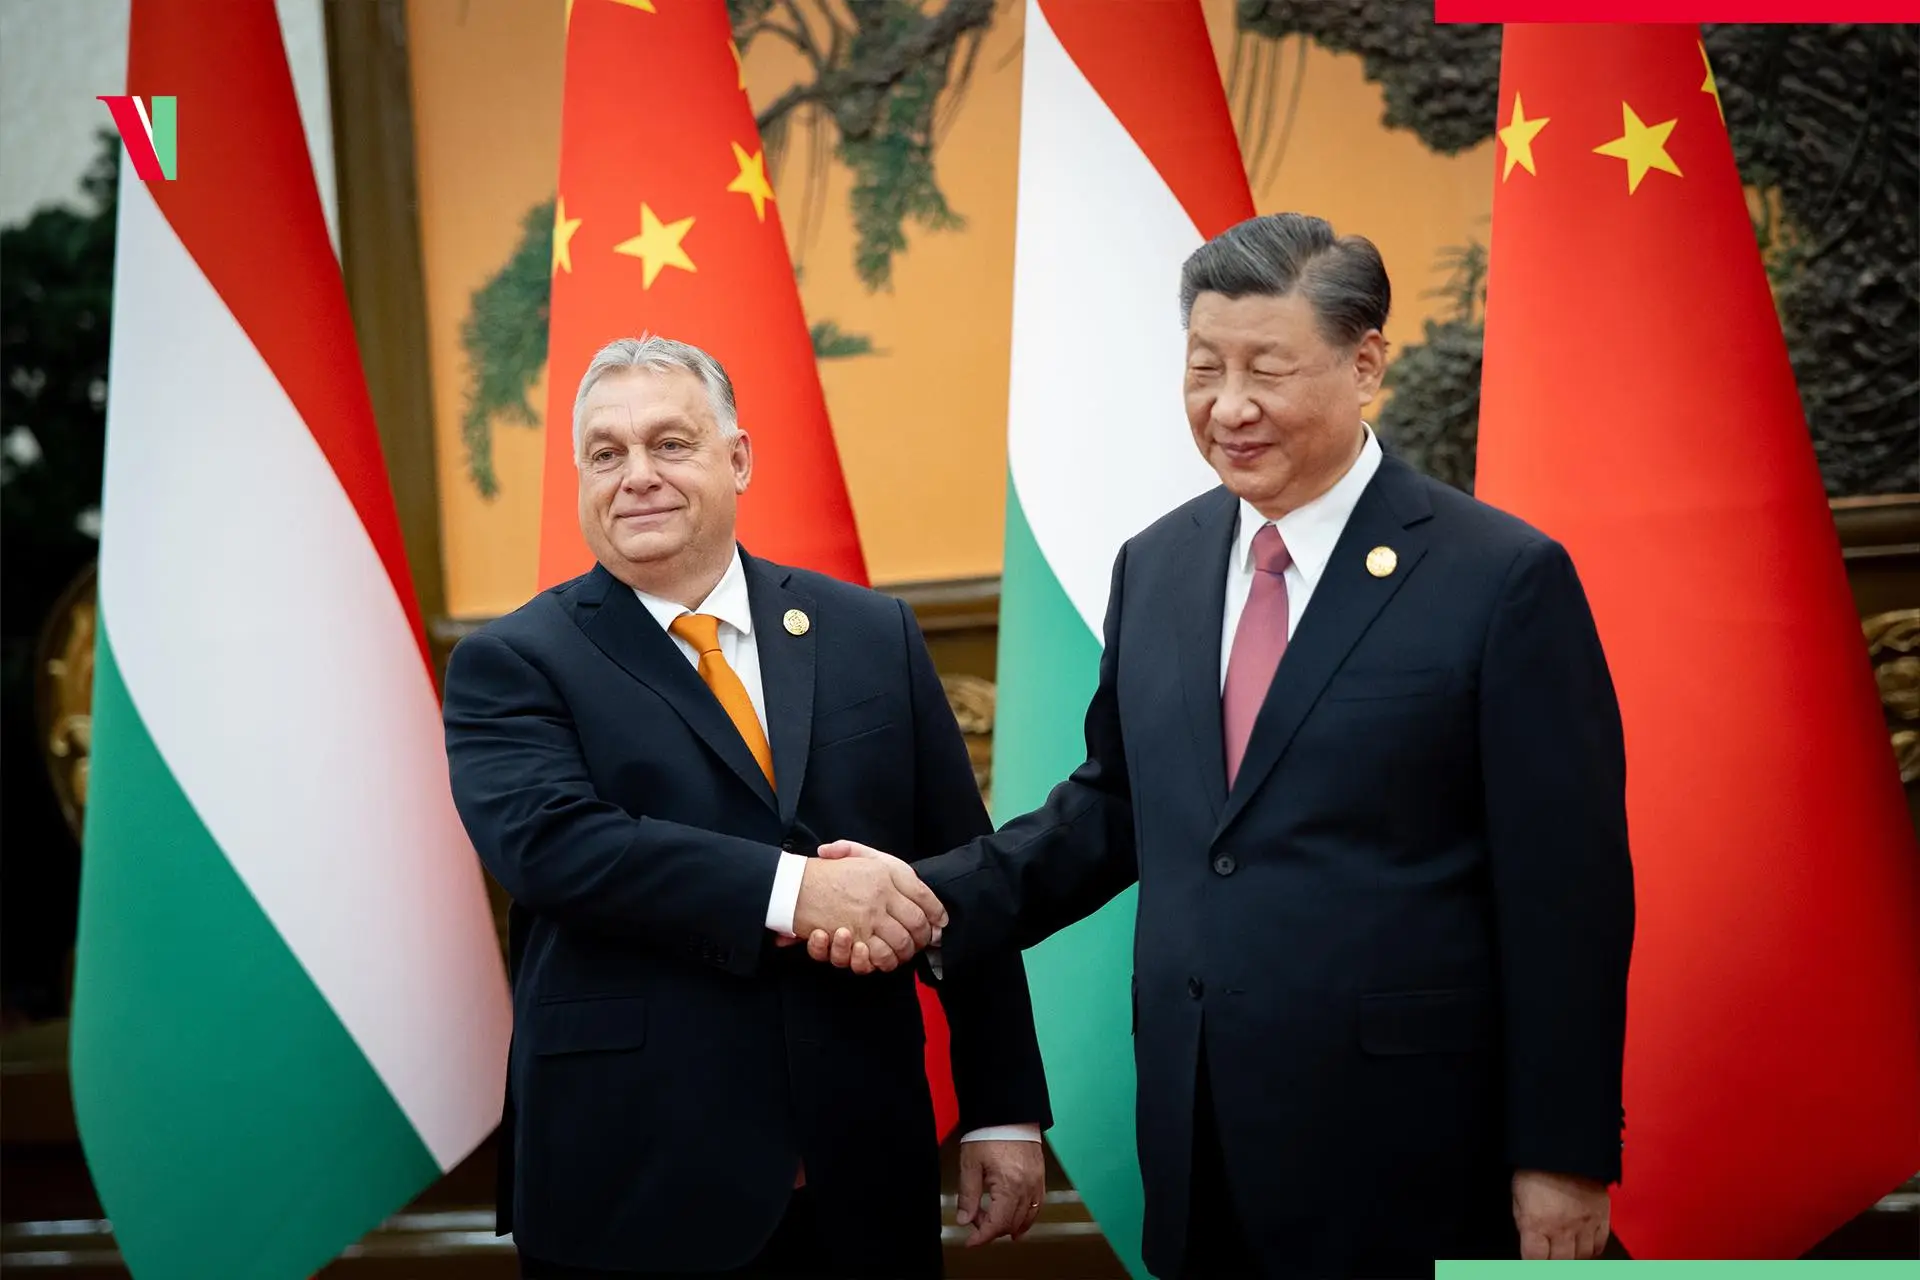 Chinese President to visit Budapest: why is Xi coming to Hungary?